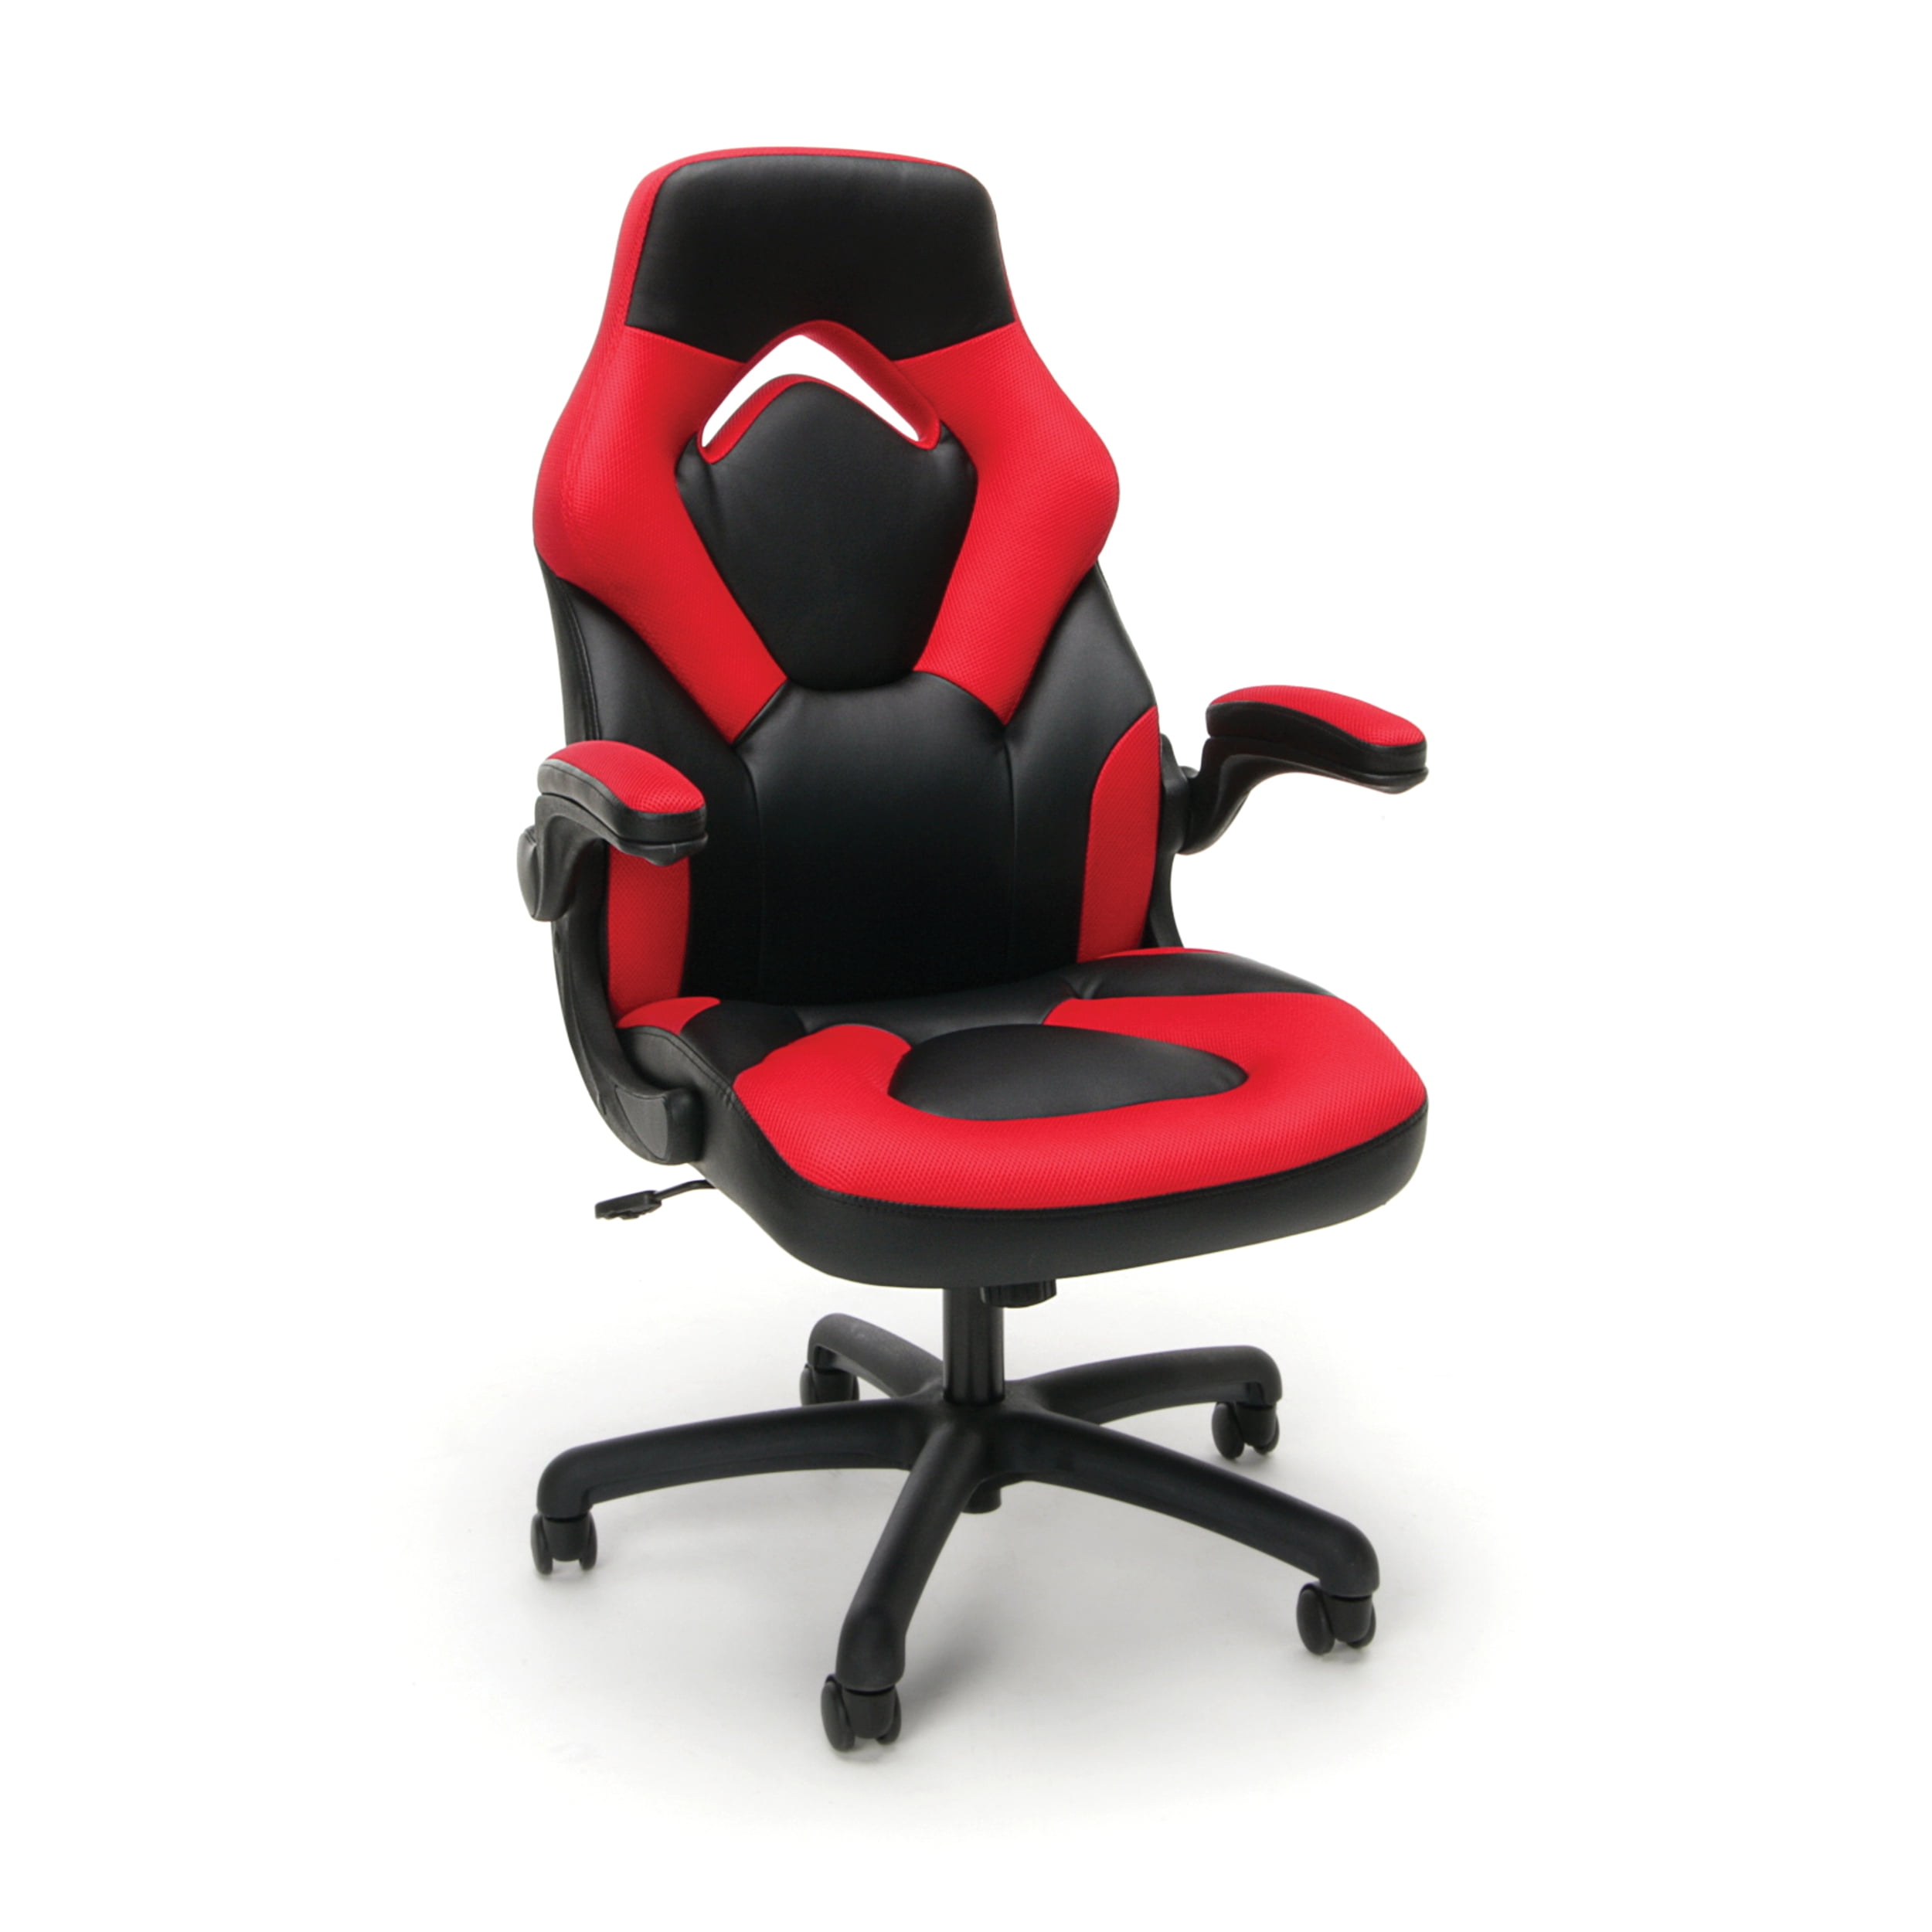 PC Gaming Chair Swivel High Back Ergonomic Leather RC Adjustable Office Red New 